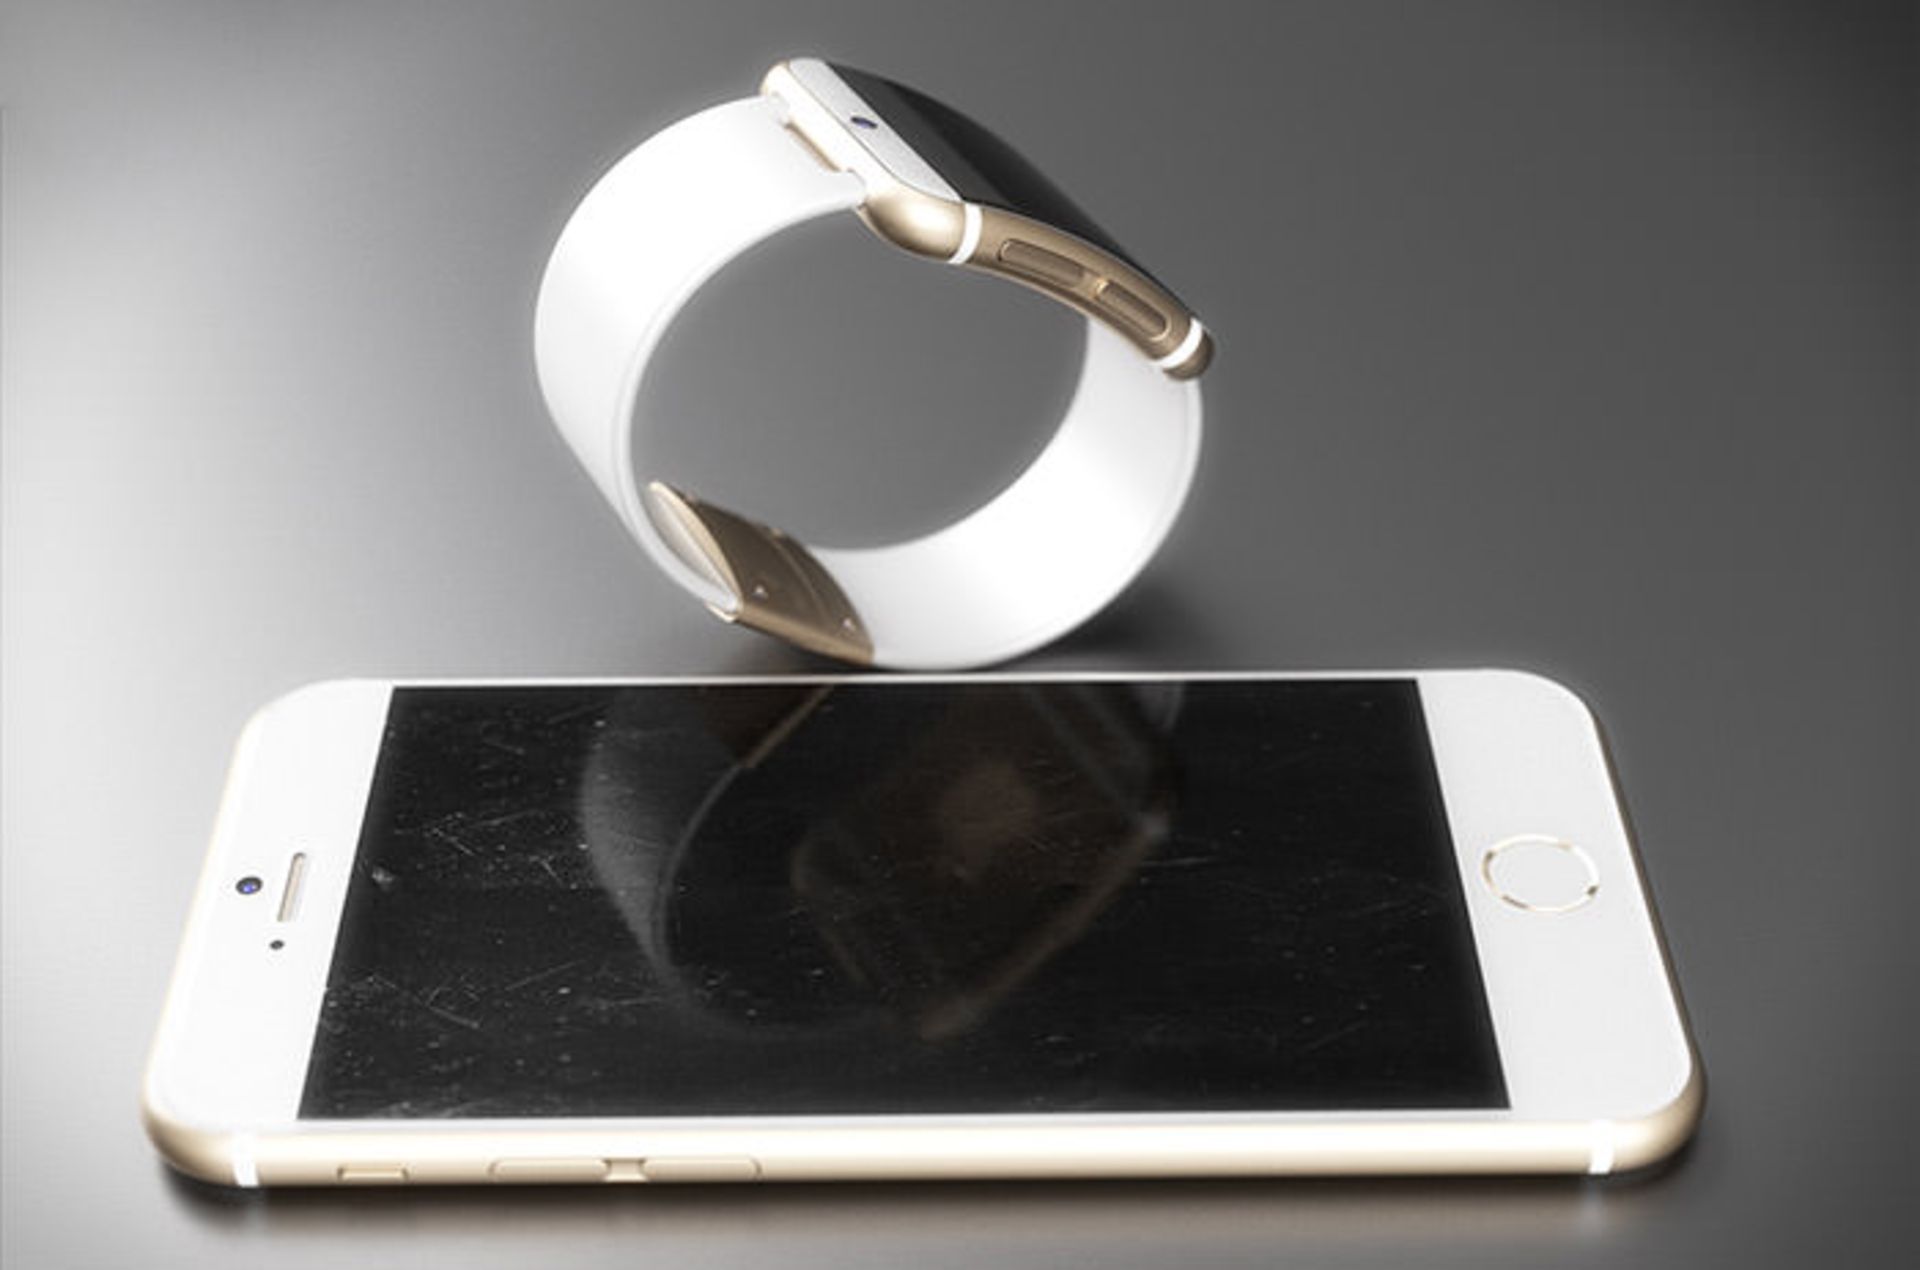 14Apple-iWatch-concept-shows-dreamy-curves-iPhone-esque-looks